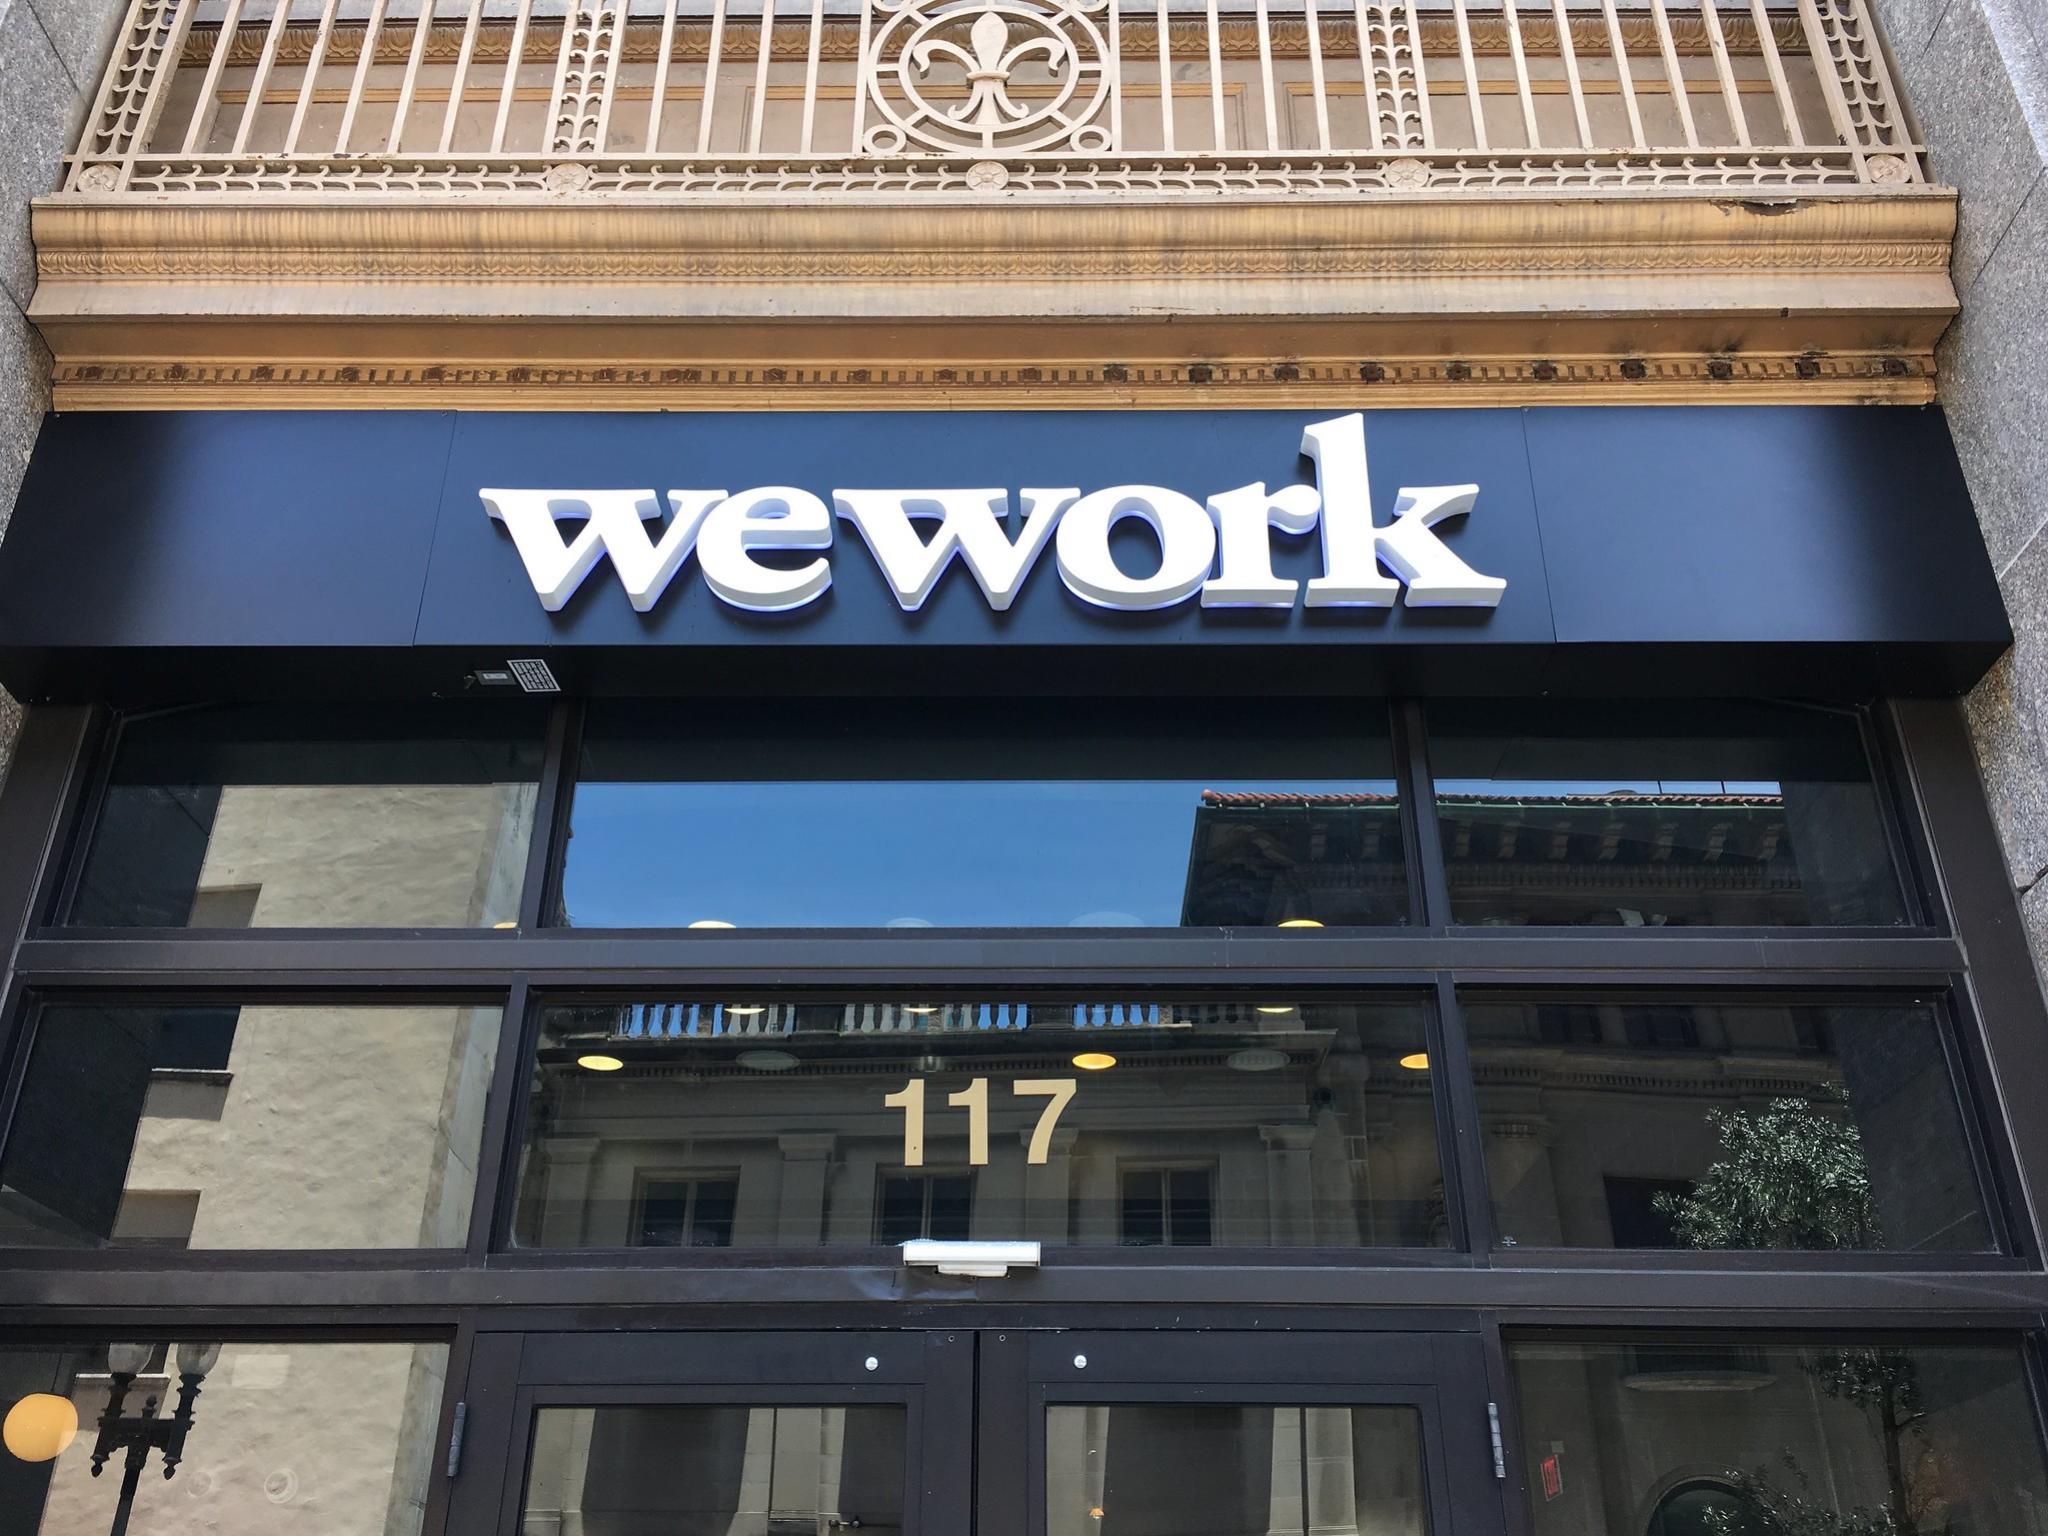  wework-stock-is-getting-crushed-wednesday-whats-going-on 